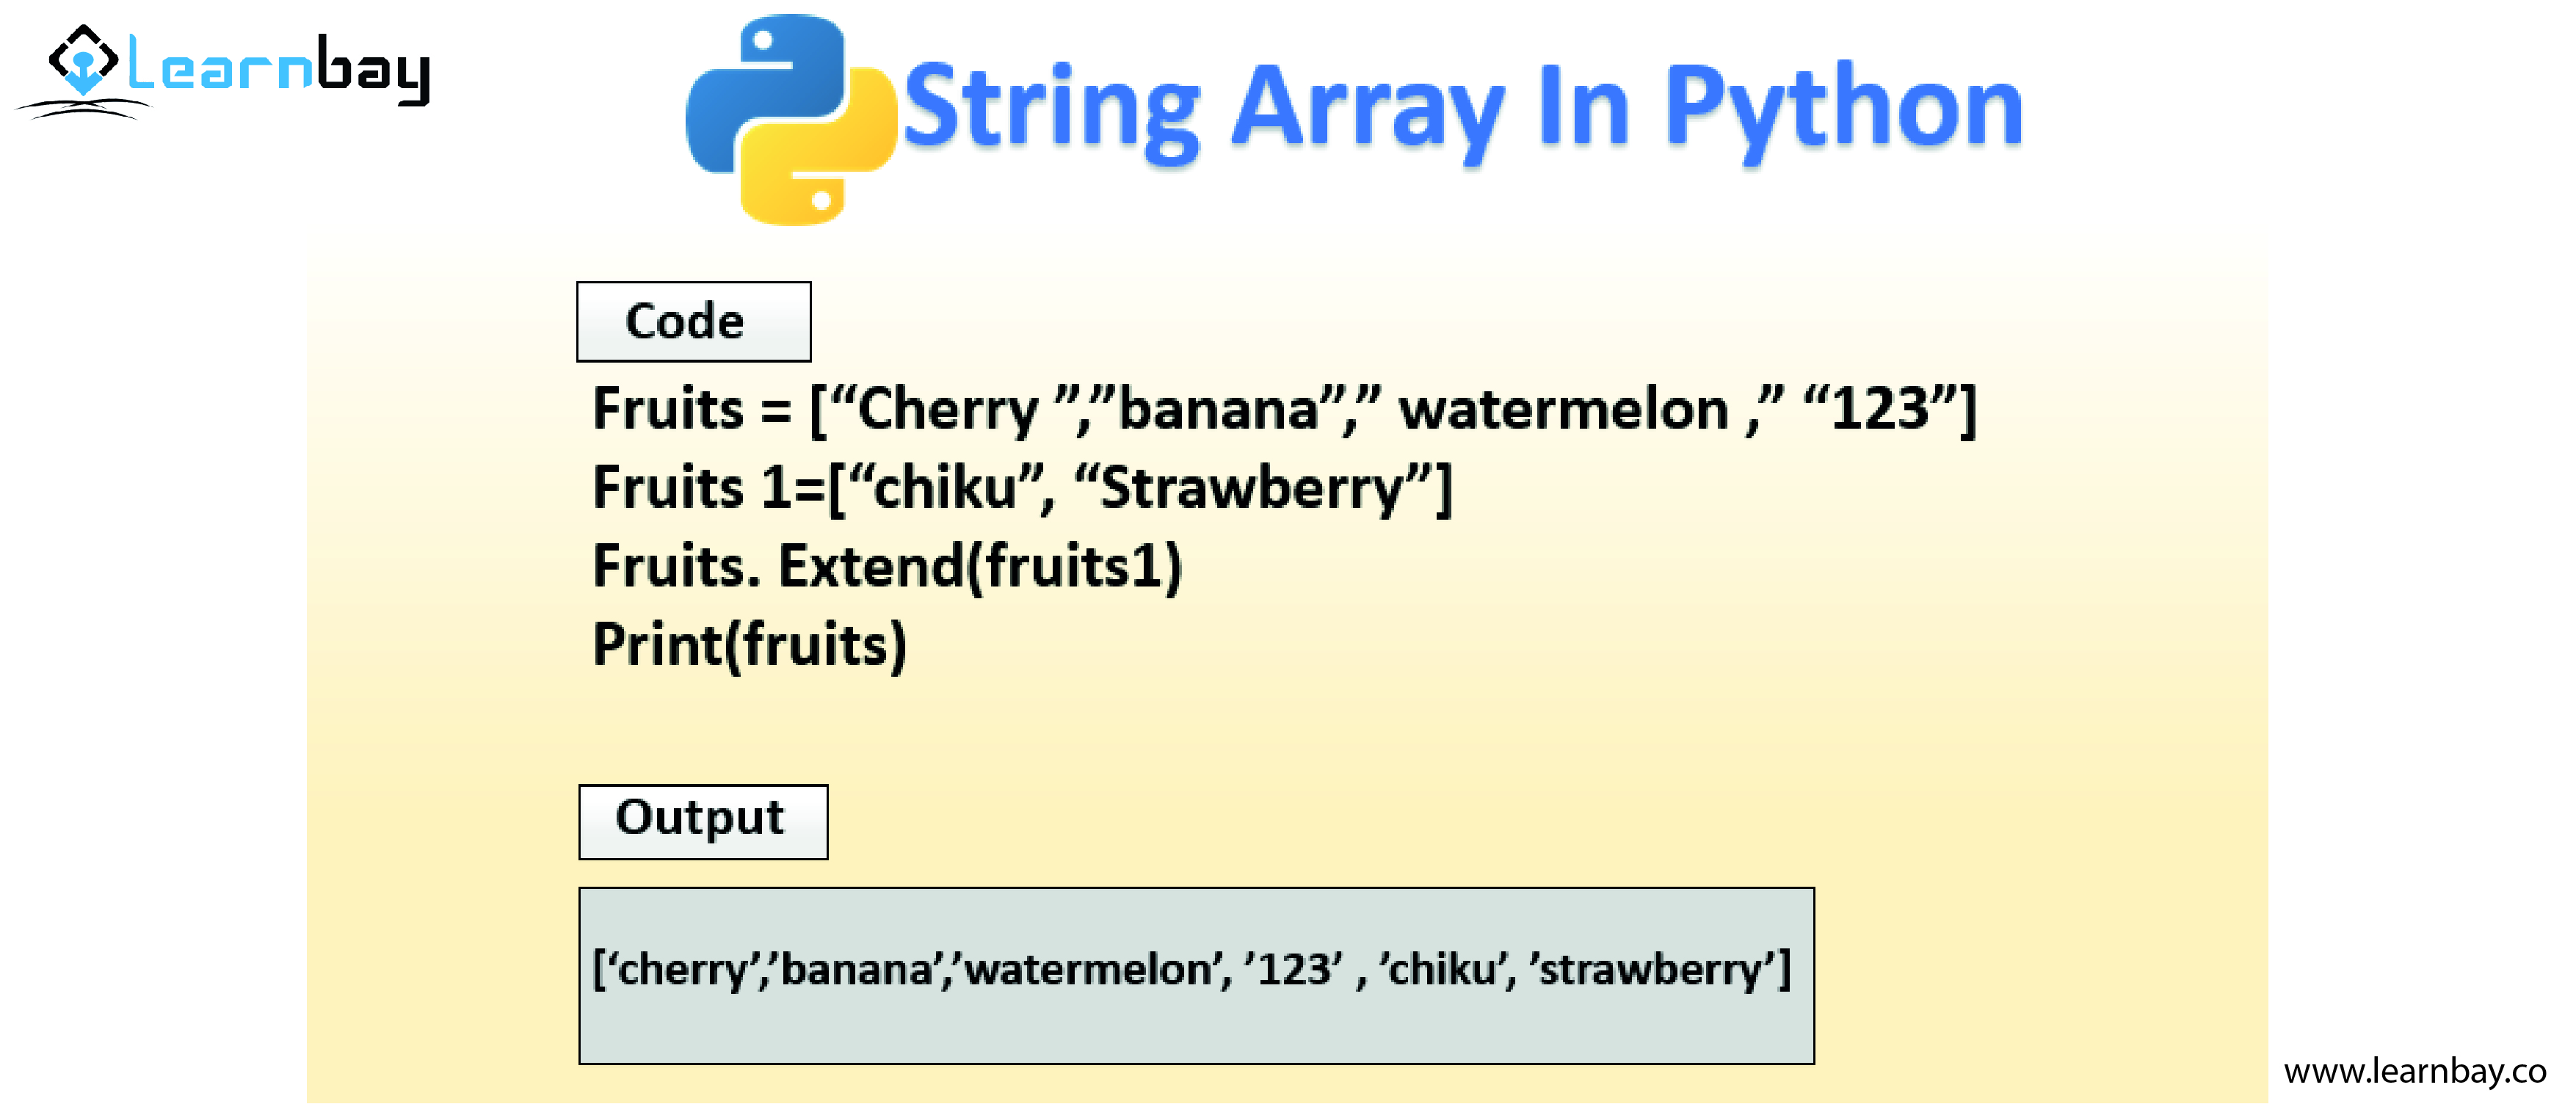 An image demonstrates various codes and outputs related to Python's String Data Type.